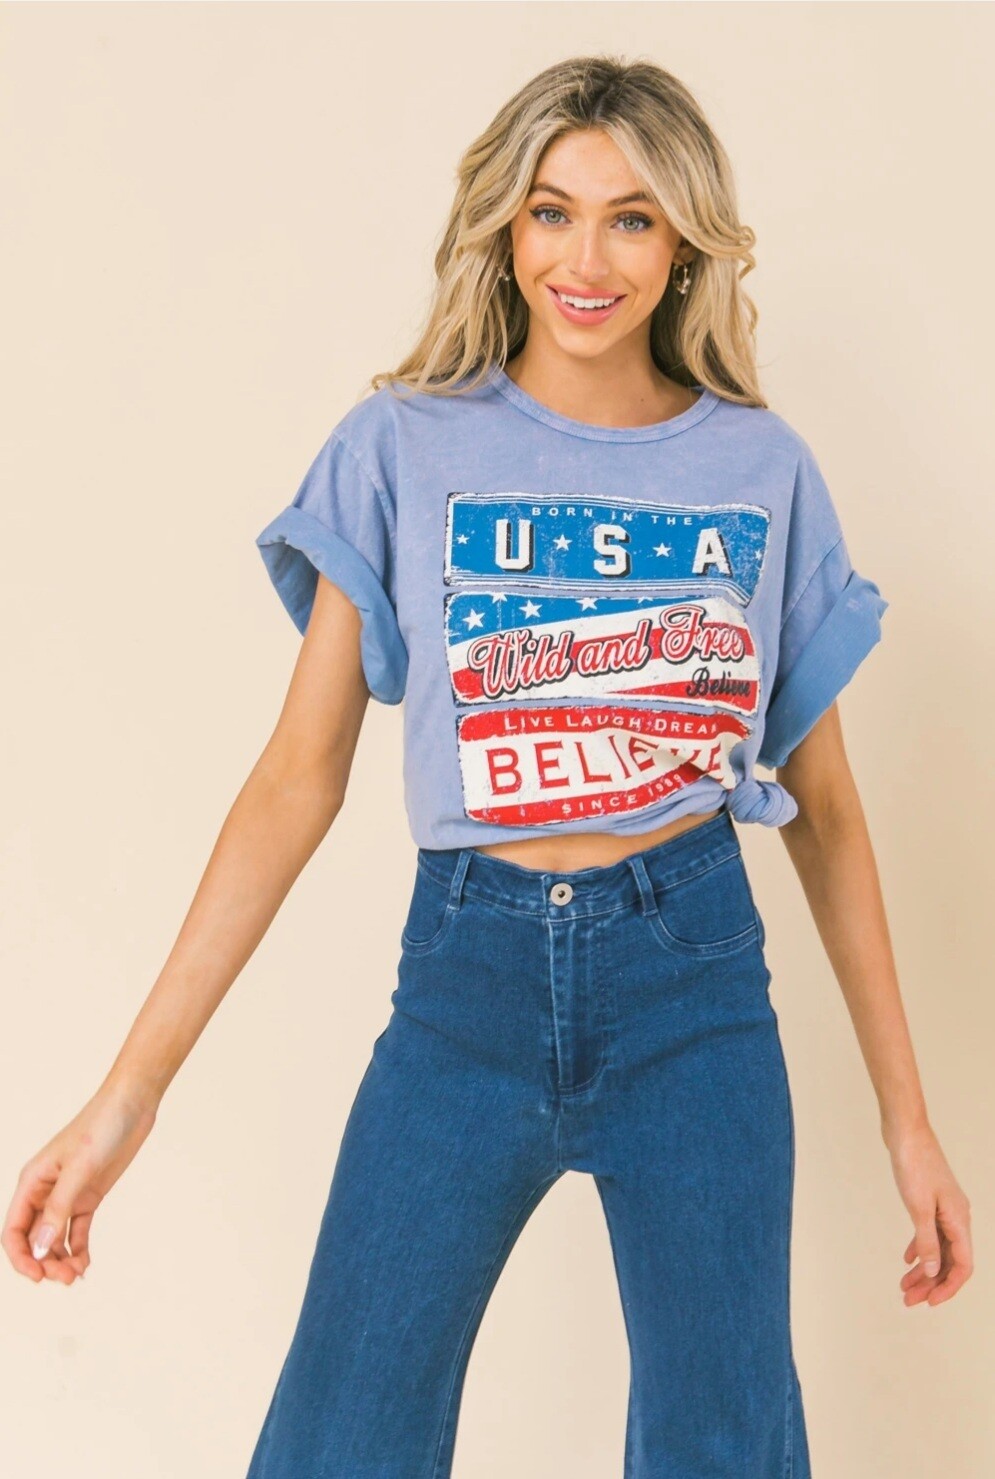 Born in the USA T-shirt